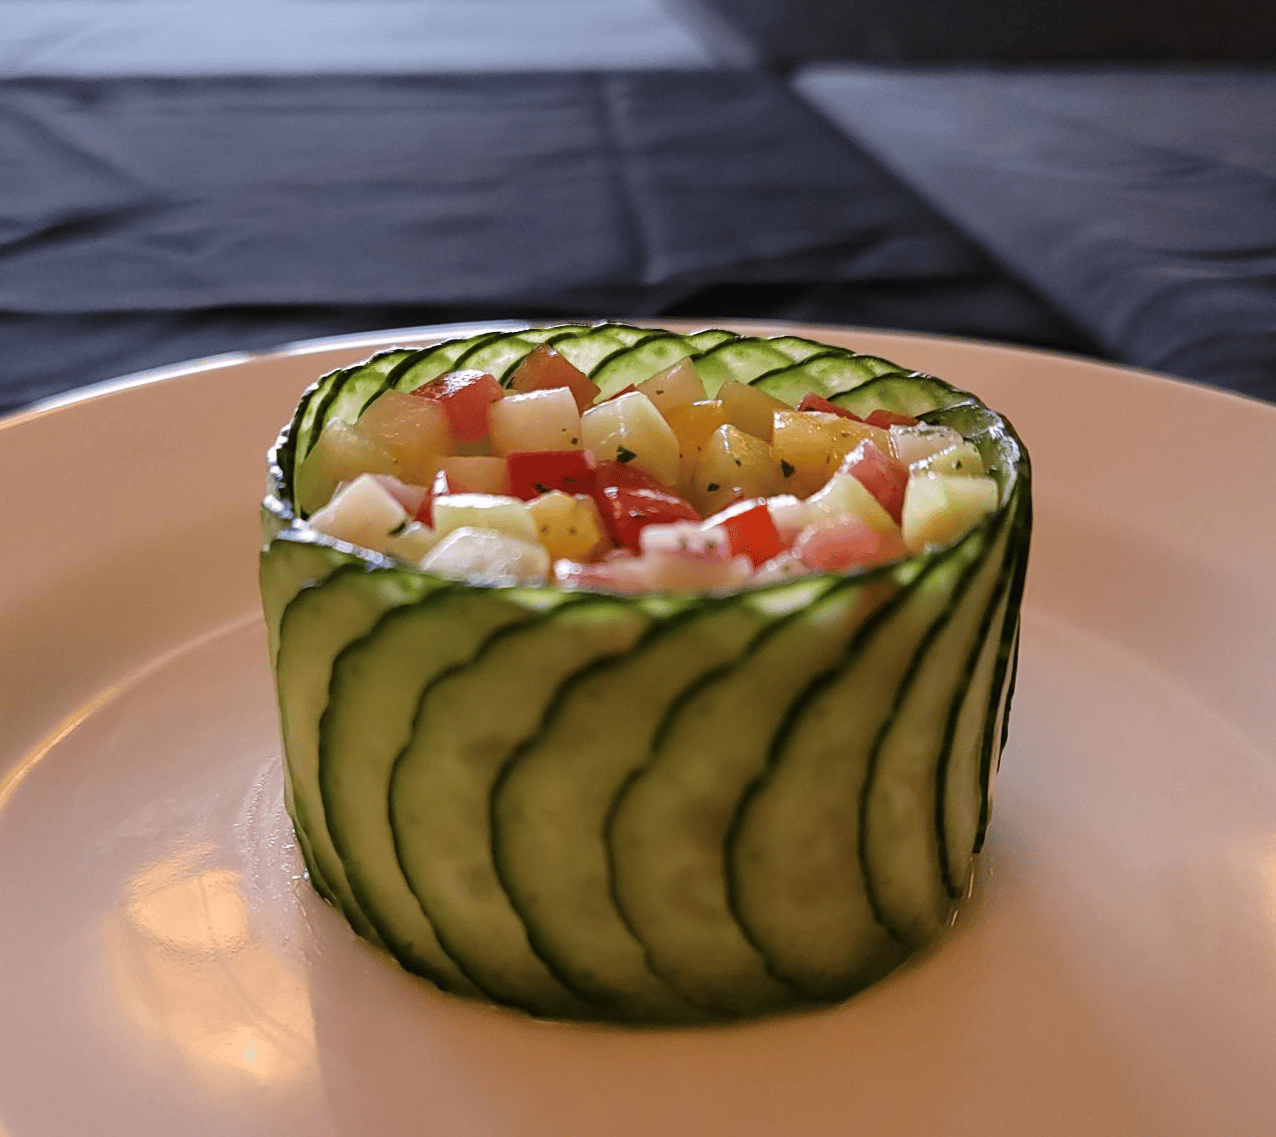 haute-couture salad which is thinly sliced cucumber wrapper around to hold the salad inside.